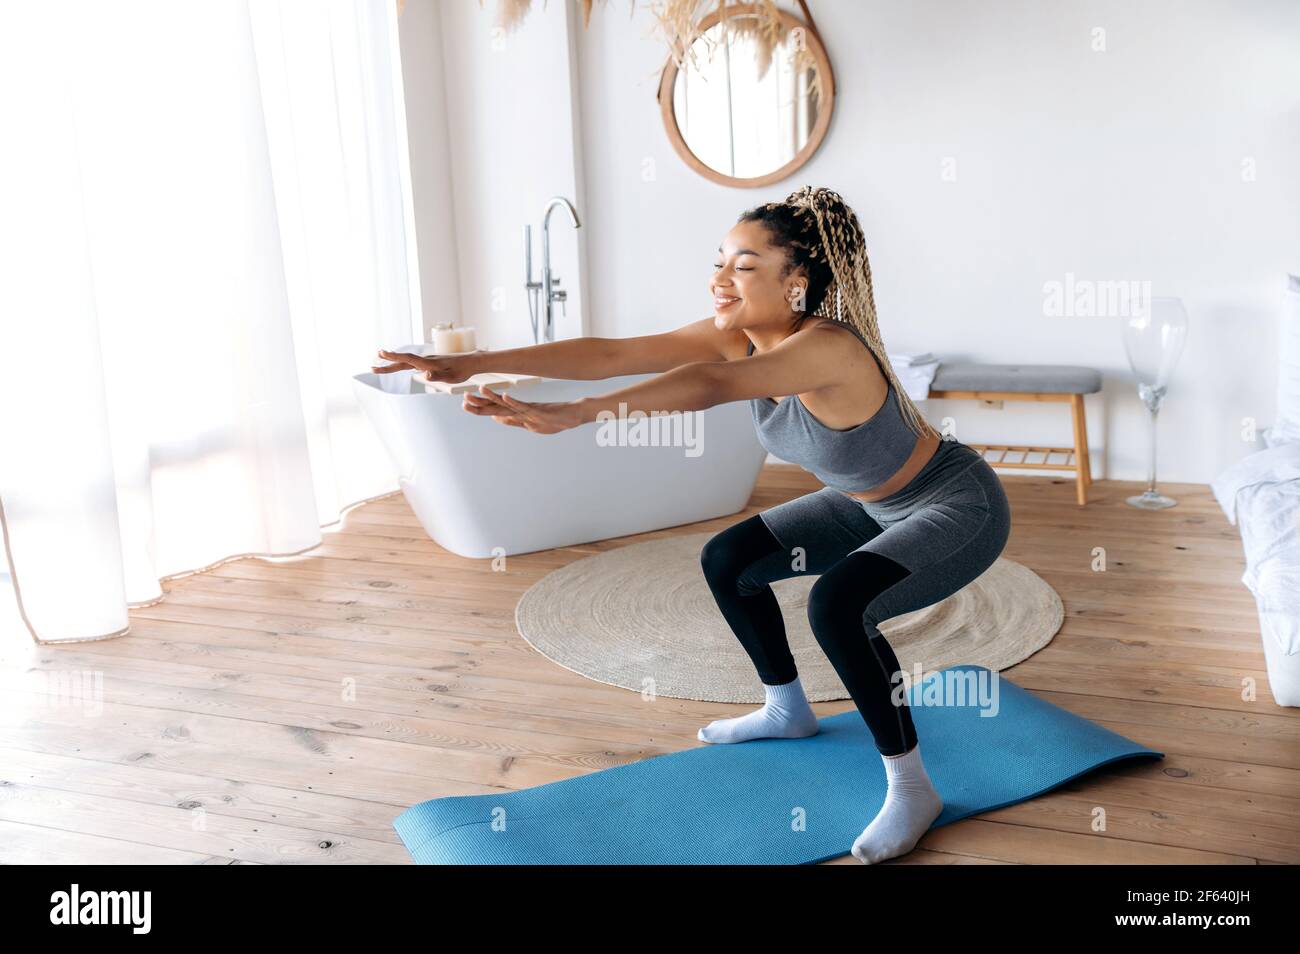 Healthy and sporty lifestyle. Attractive young African American slim sporty girl with dreadlocks care her health, does sports at home on fitness mat, does sit-ups with her arms outstretched, smiles Stock Photo